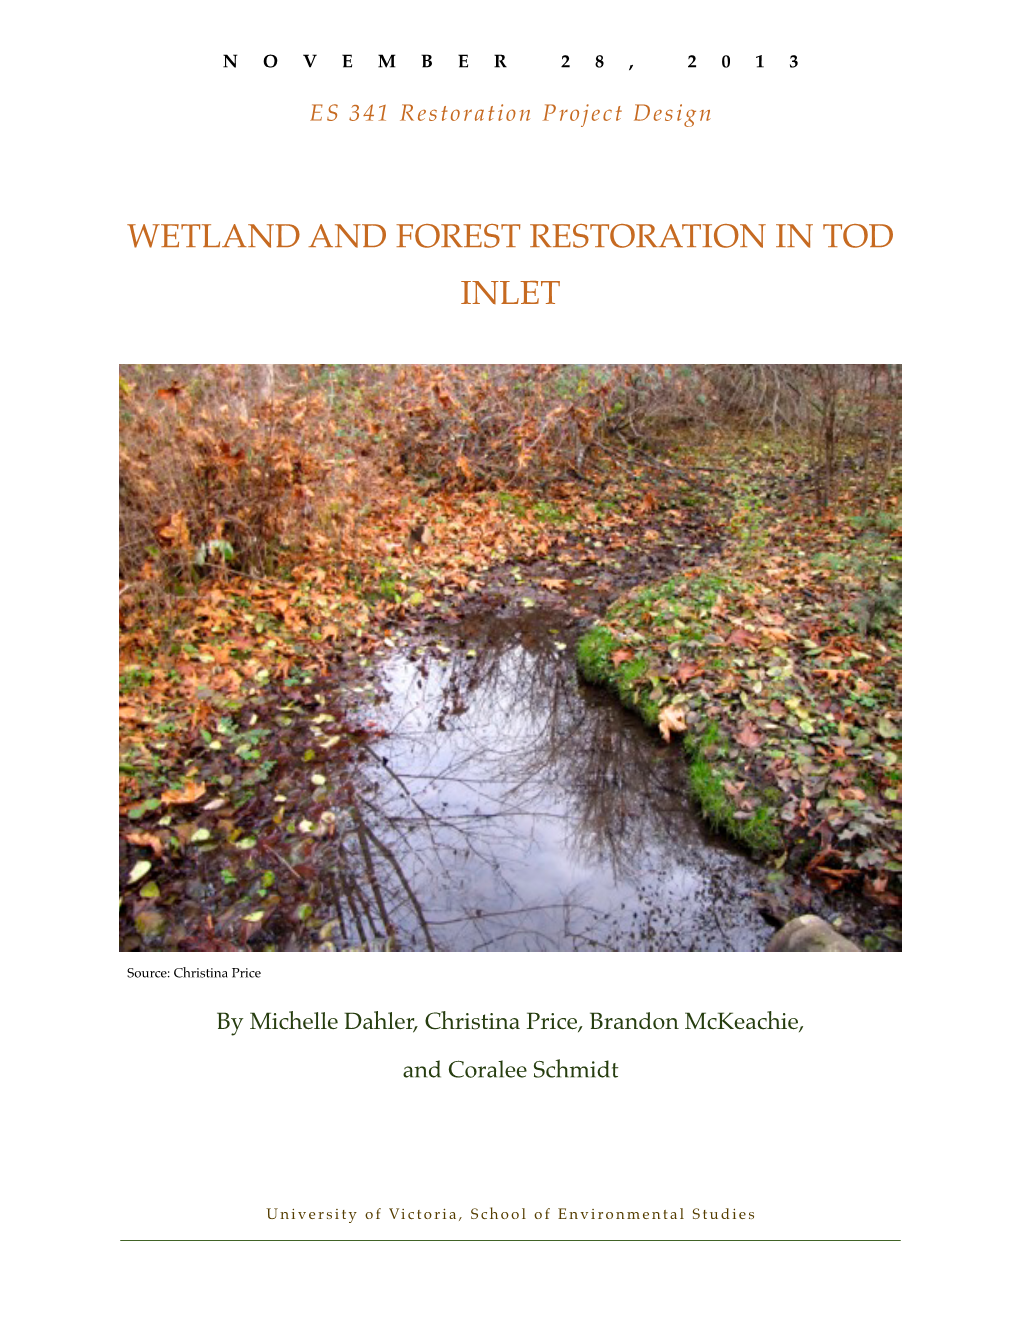 Wetland and Forest Restoration in Tod Inlet